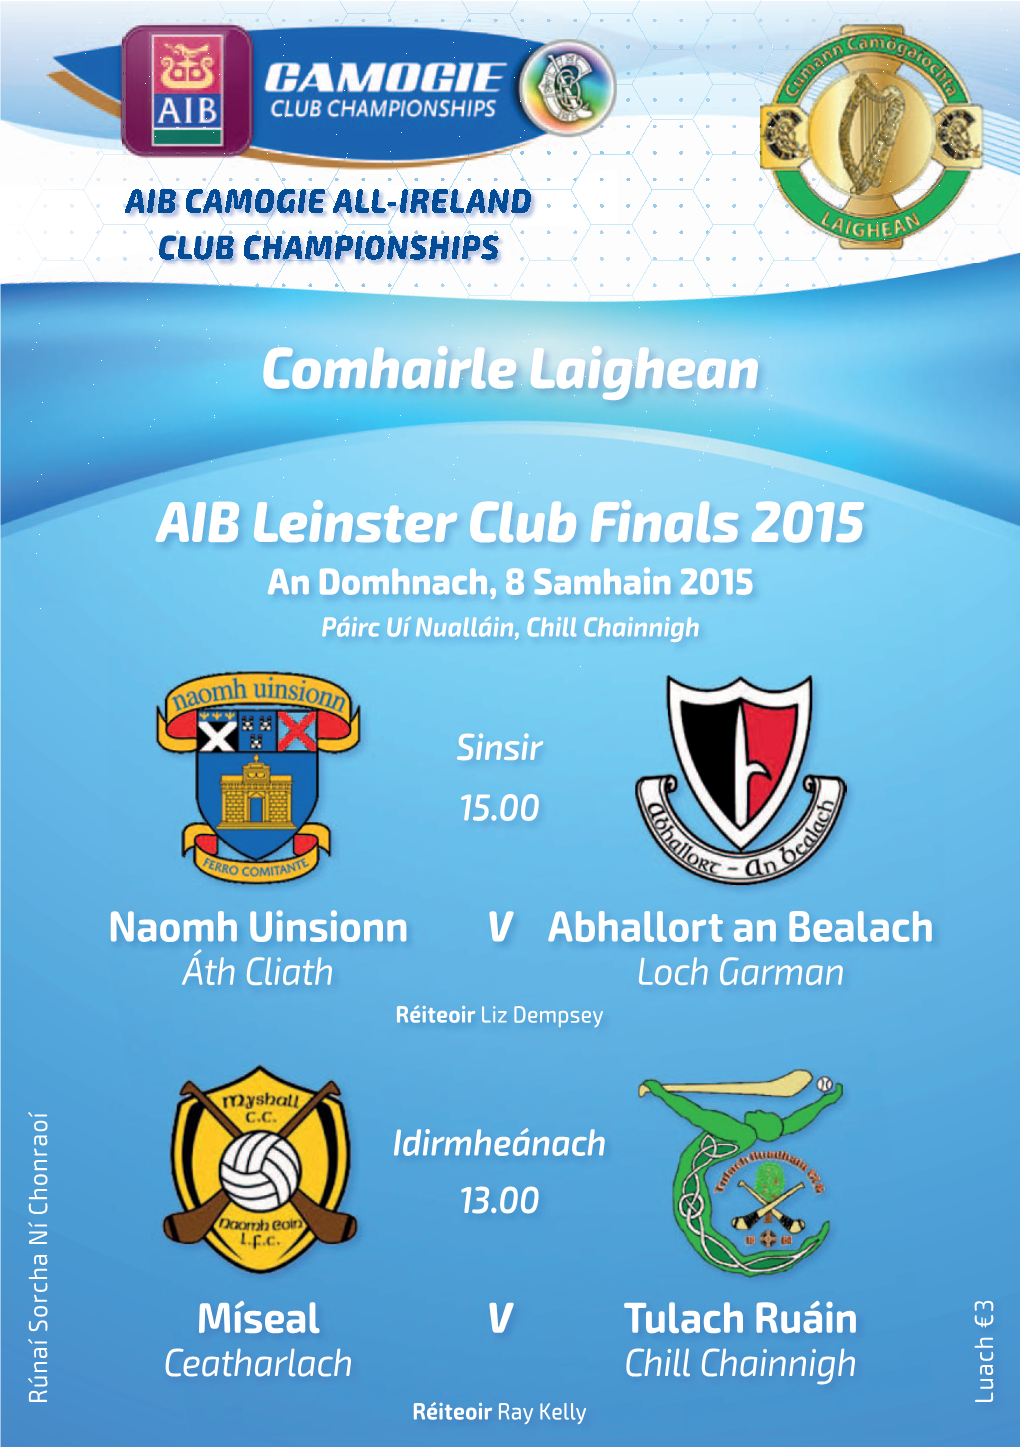 613531 Camogie Leinster Champs Final 2015.Indd